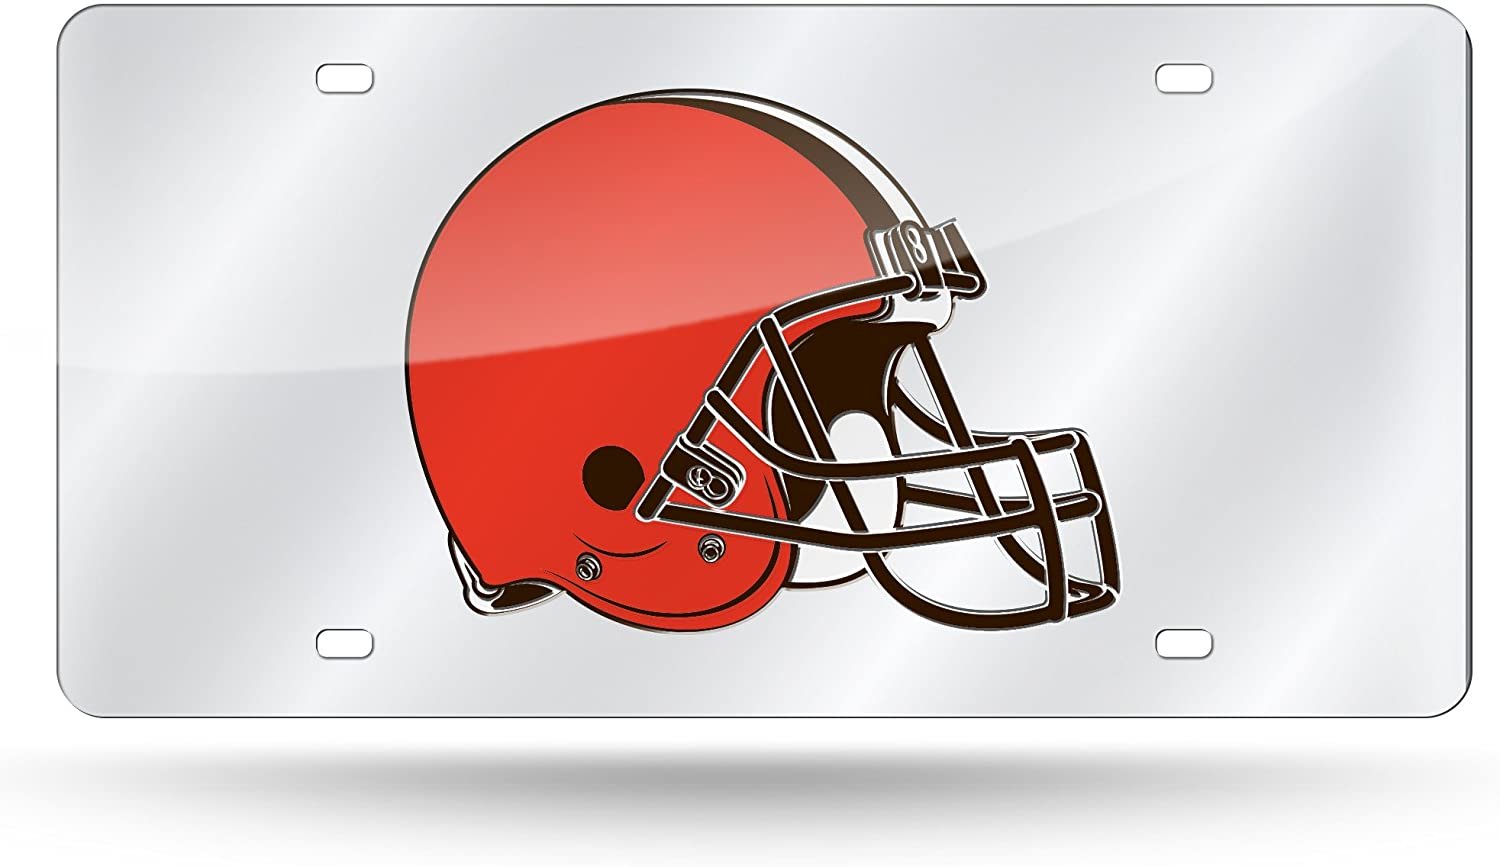 Cleveland Browns Premium Laser Cut Tag License Plate, Mirrored Acrylic Inlaid, 12x6 Inch